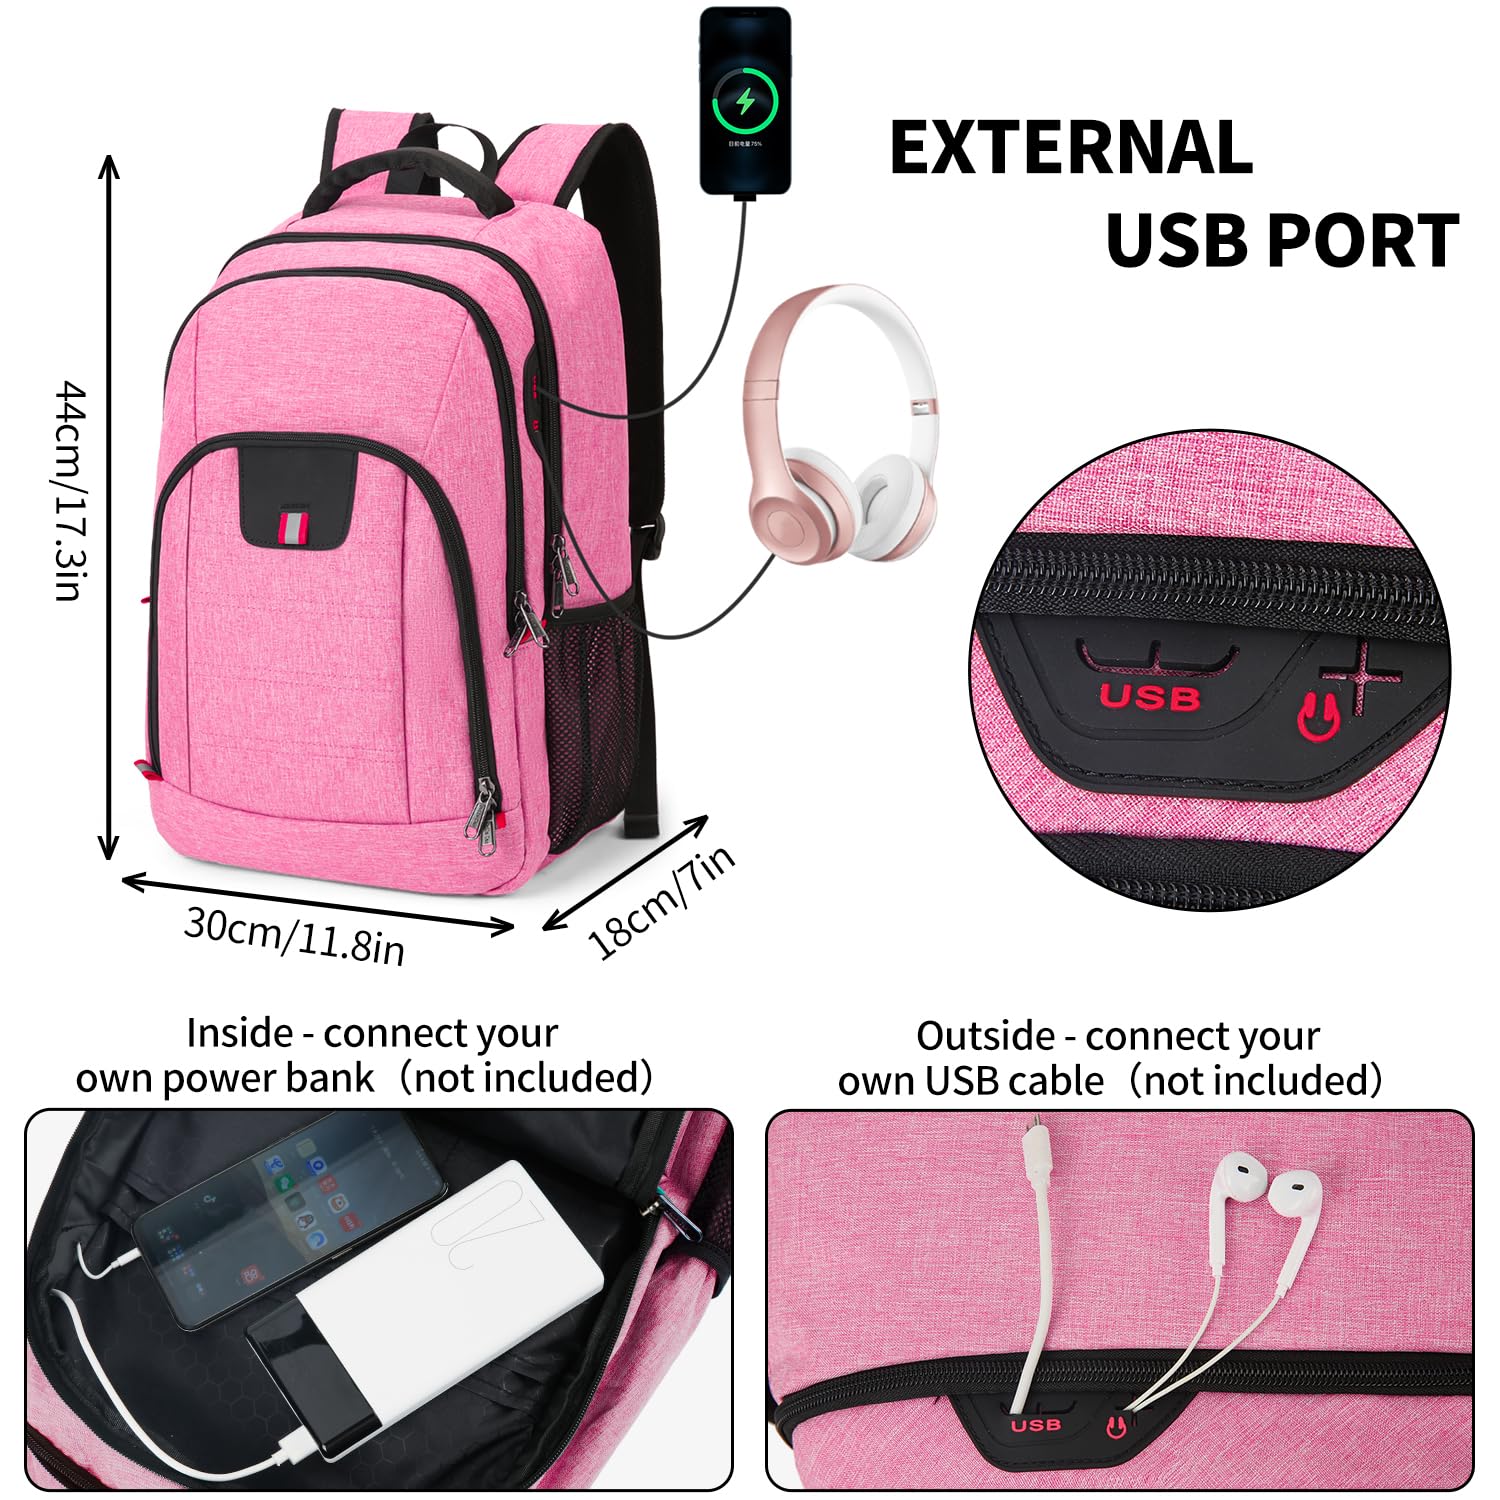 Della Gao Travel Laptop Backpack, Water Resistant Work Backpack with Laptop Compartment, Airline Approved Business Backpack Fit 15.6 Inch Laptops for Women, Pink